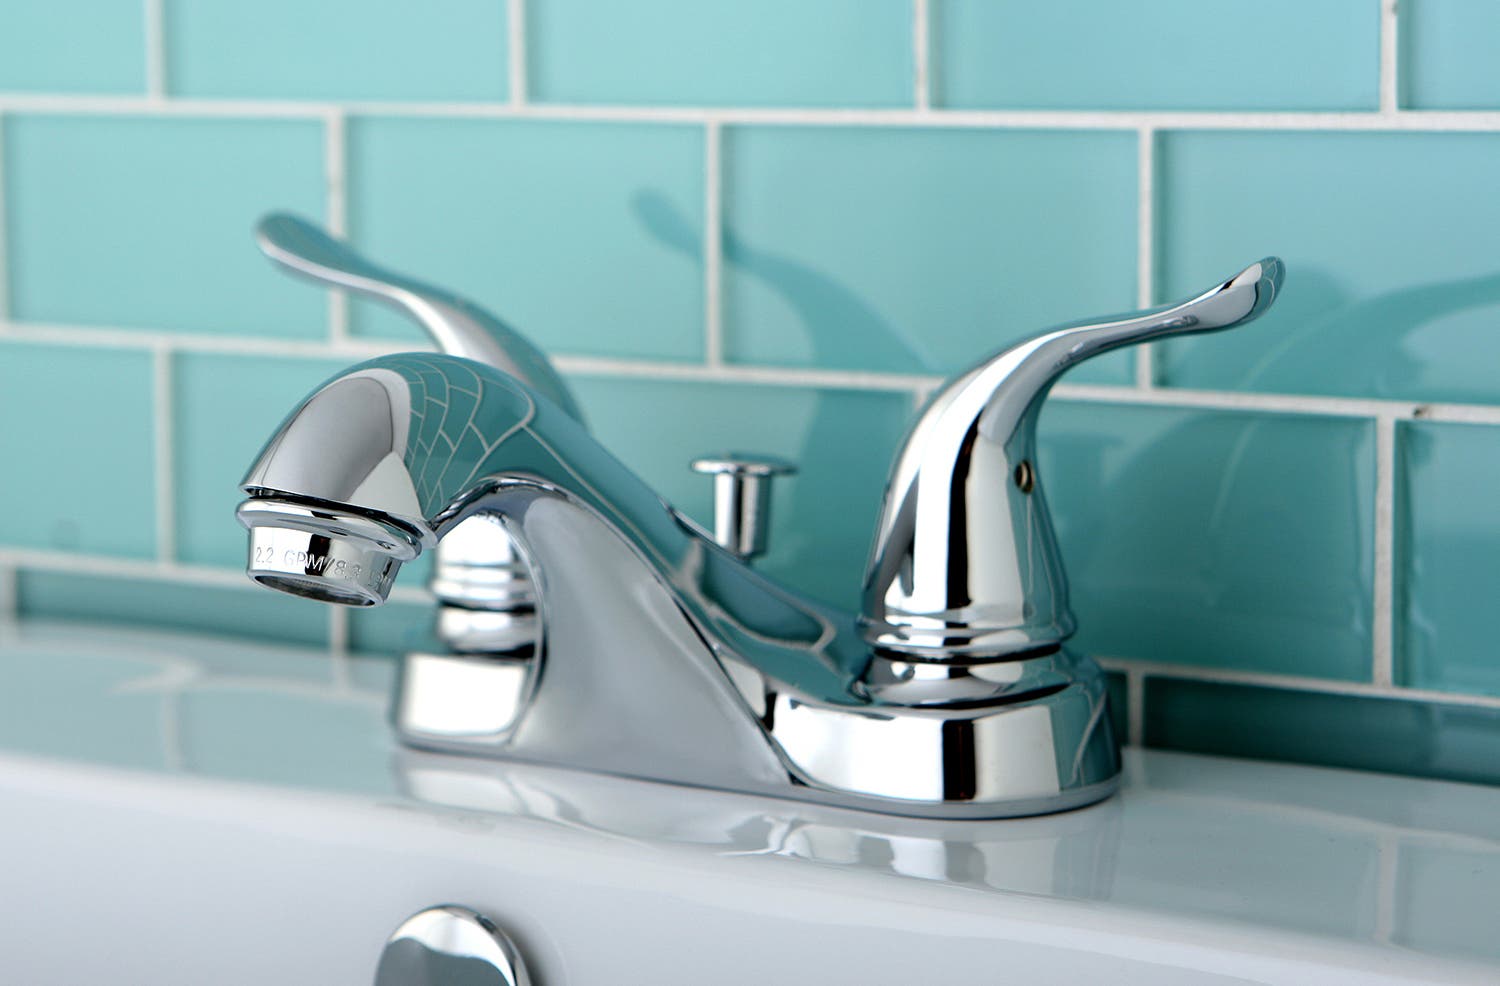 Yosemite Reveals Contemporary Elegance with the Bathroom Centerset Faucet, KB5621YL